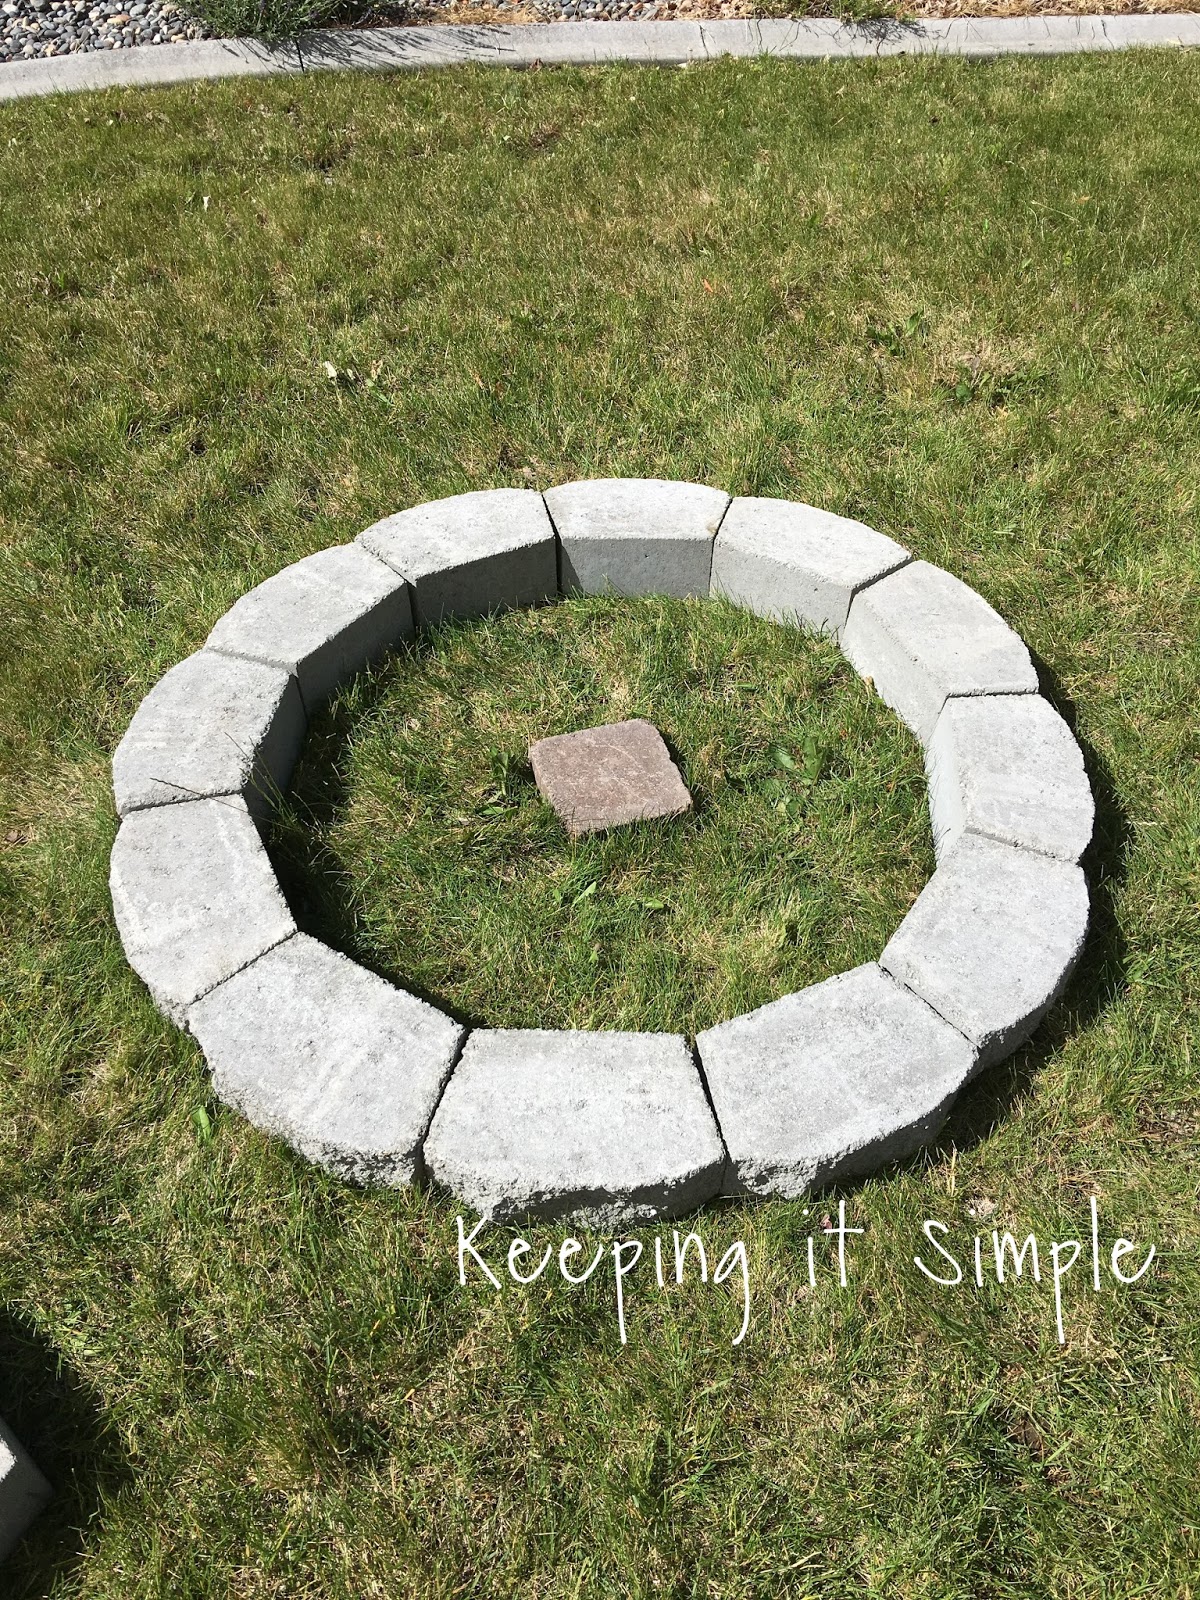 how to build a diy fire pit for only $60 • keeping it simple